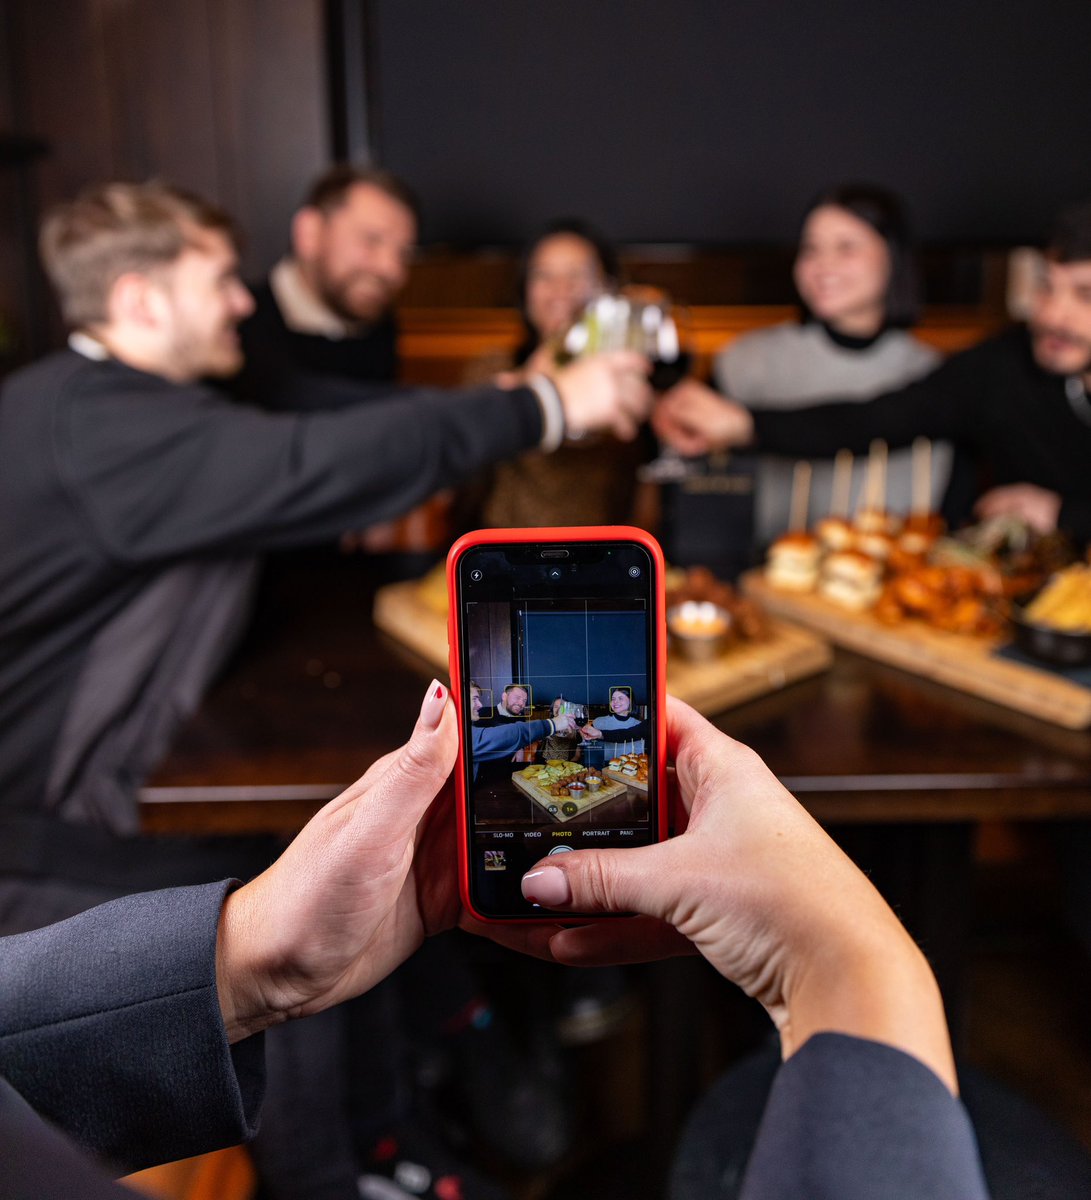 Cheers to good times, good food and unforgettable moments at Lemon and Duke. Capture the moment and share the love! #lemonandduke #dublinlunch #lunchtime #dublinlunchspots